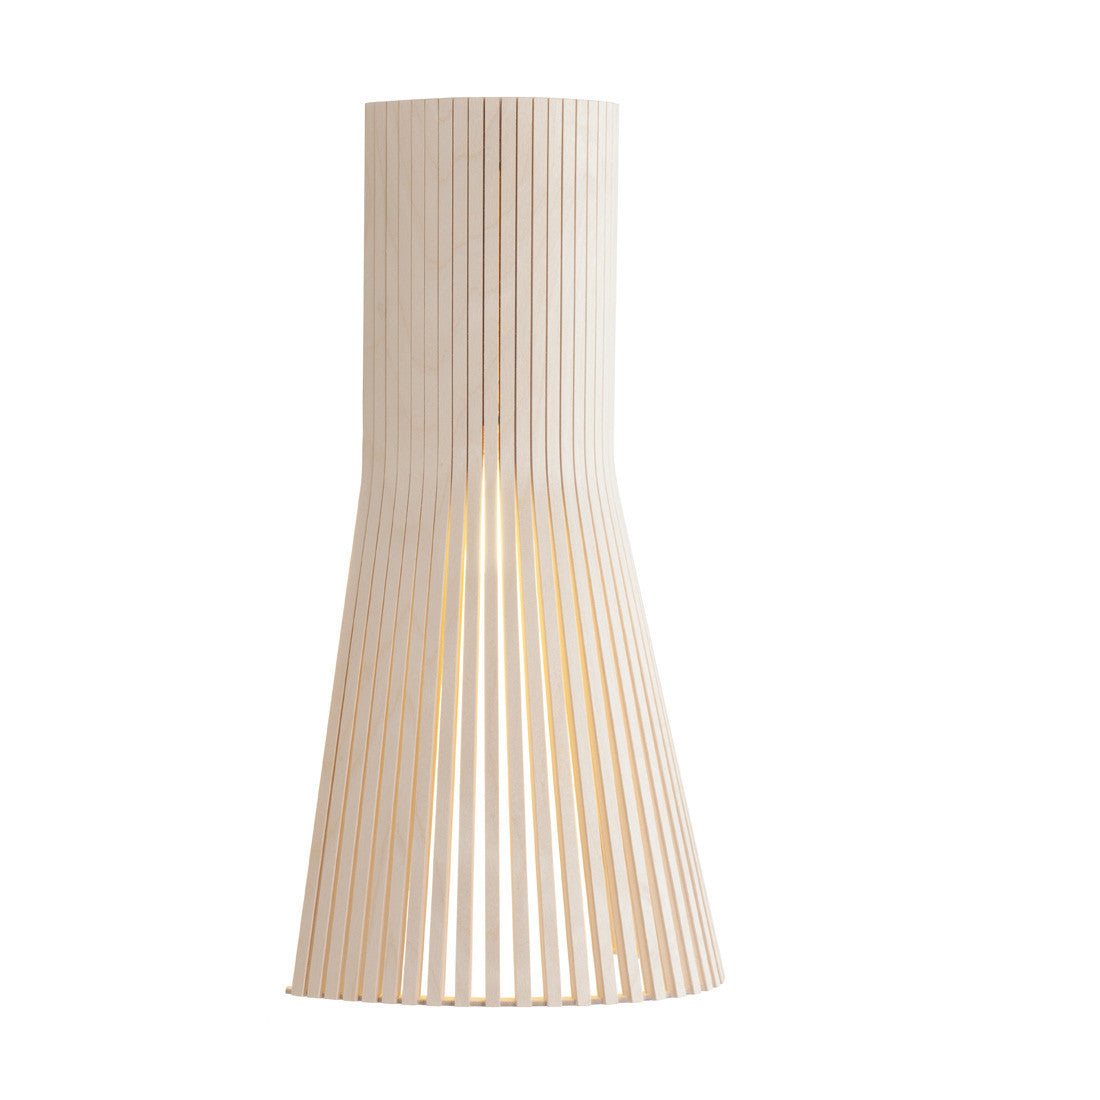 Secto 4231 Small Wall Lamp by Secto Design